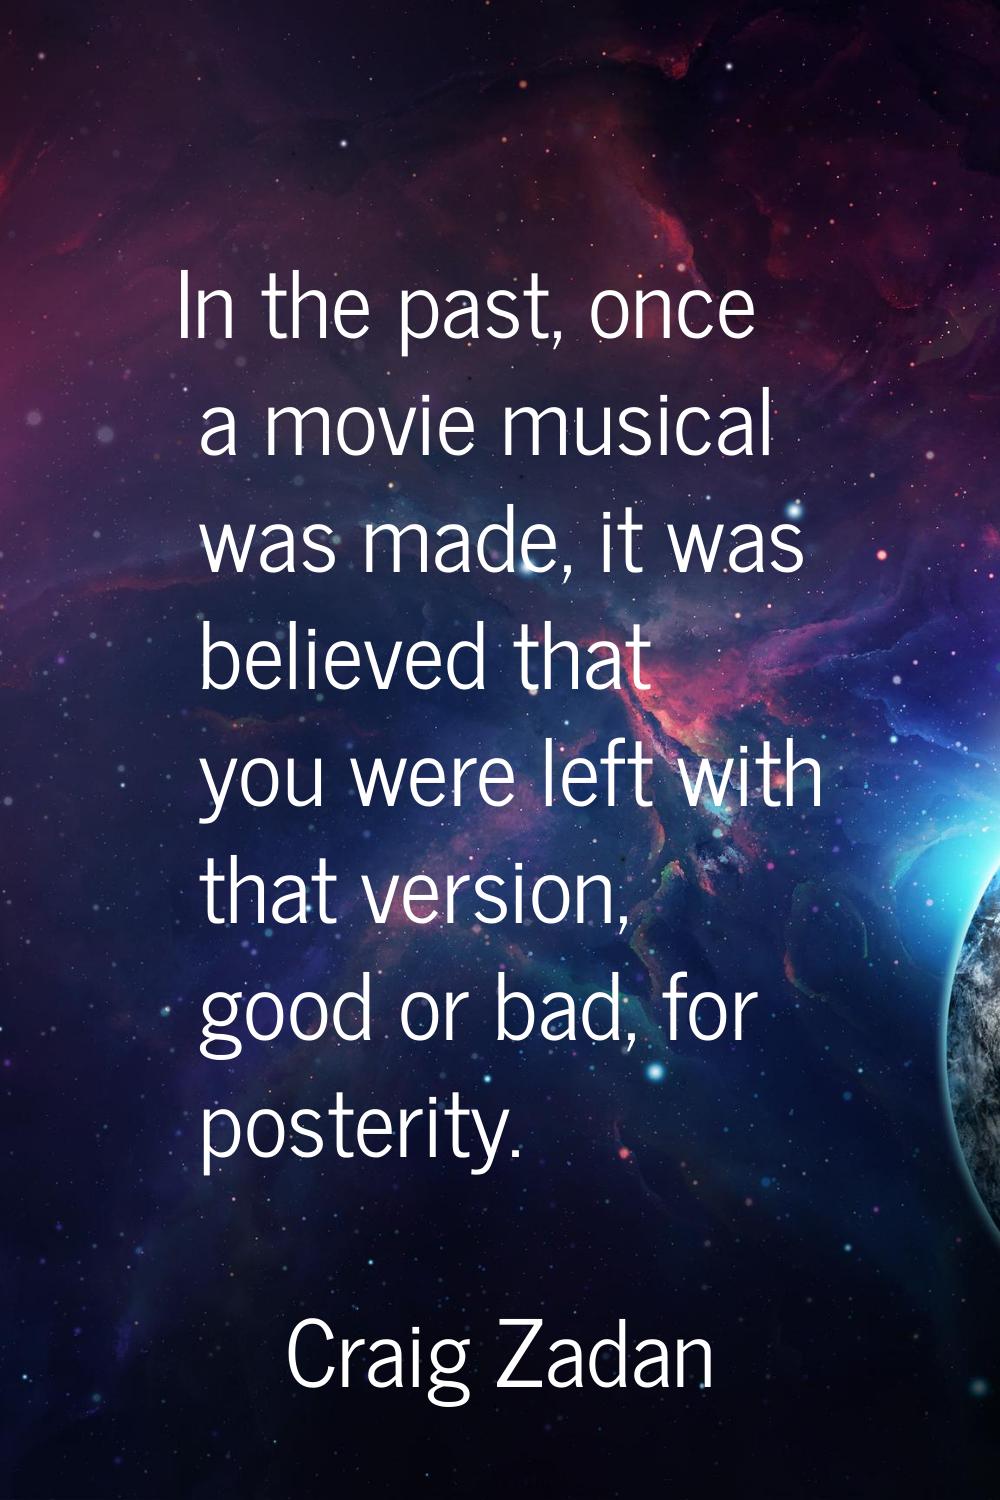 In the past, once a movie musical was made, it was believed that you were left with that version, g